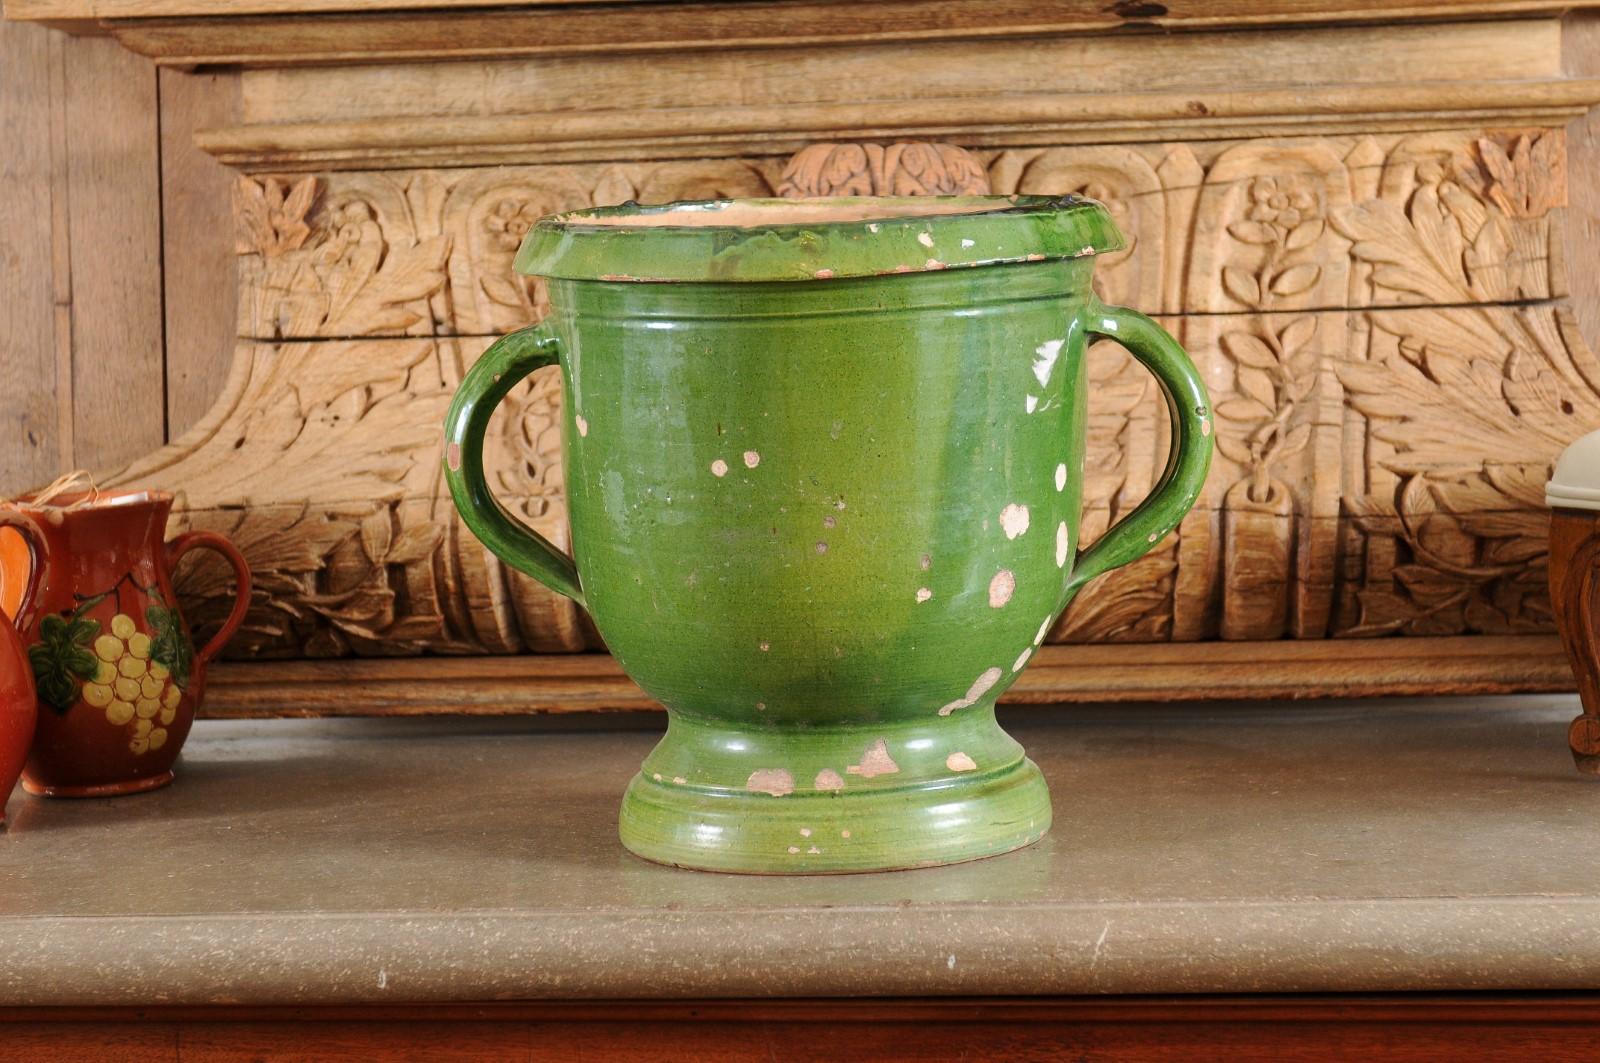 A French Provincial green glazed pottery jardinière from the mid-19th century, with lateral handles and aged patina. Created in France during the reign of emperor Napoleon III, this rustic jardinière planter features a green glazed body presenting a